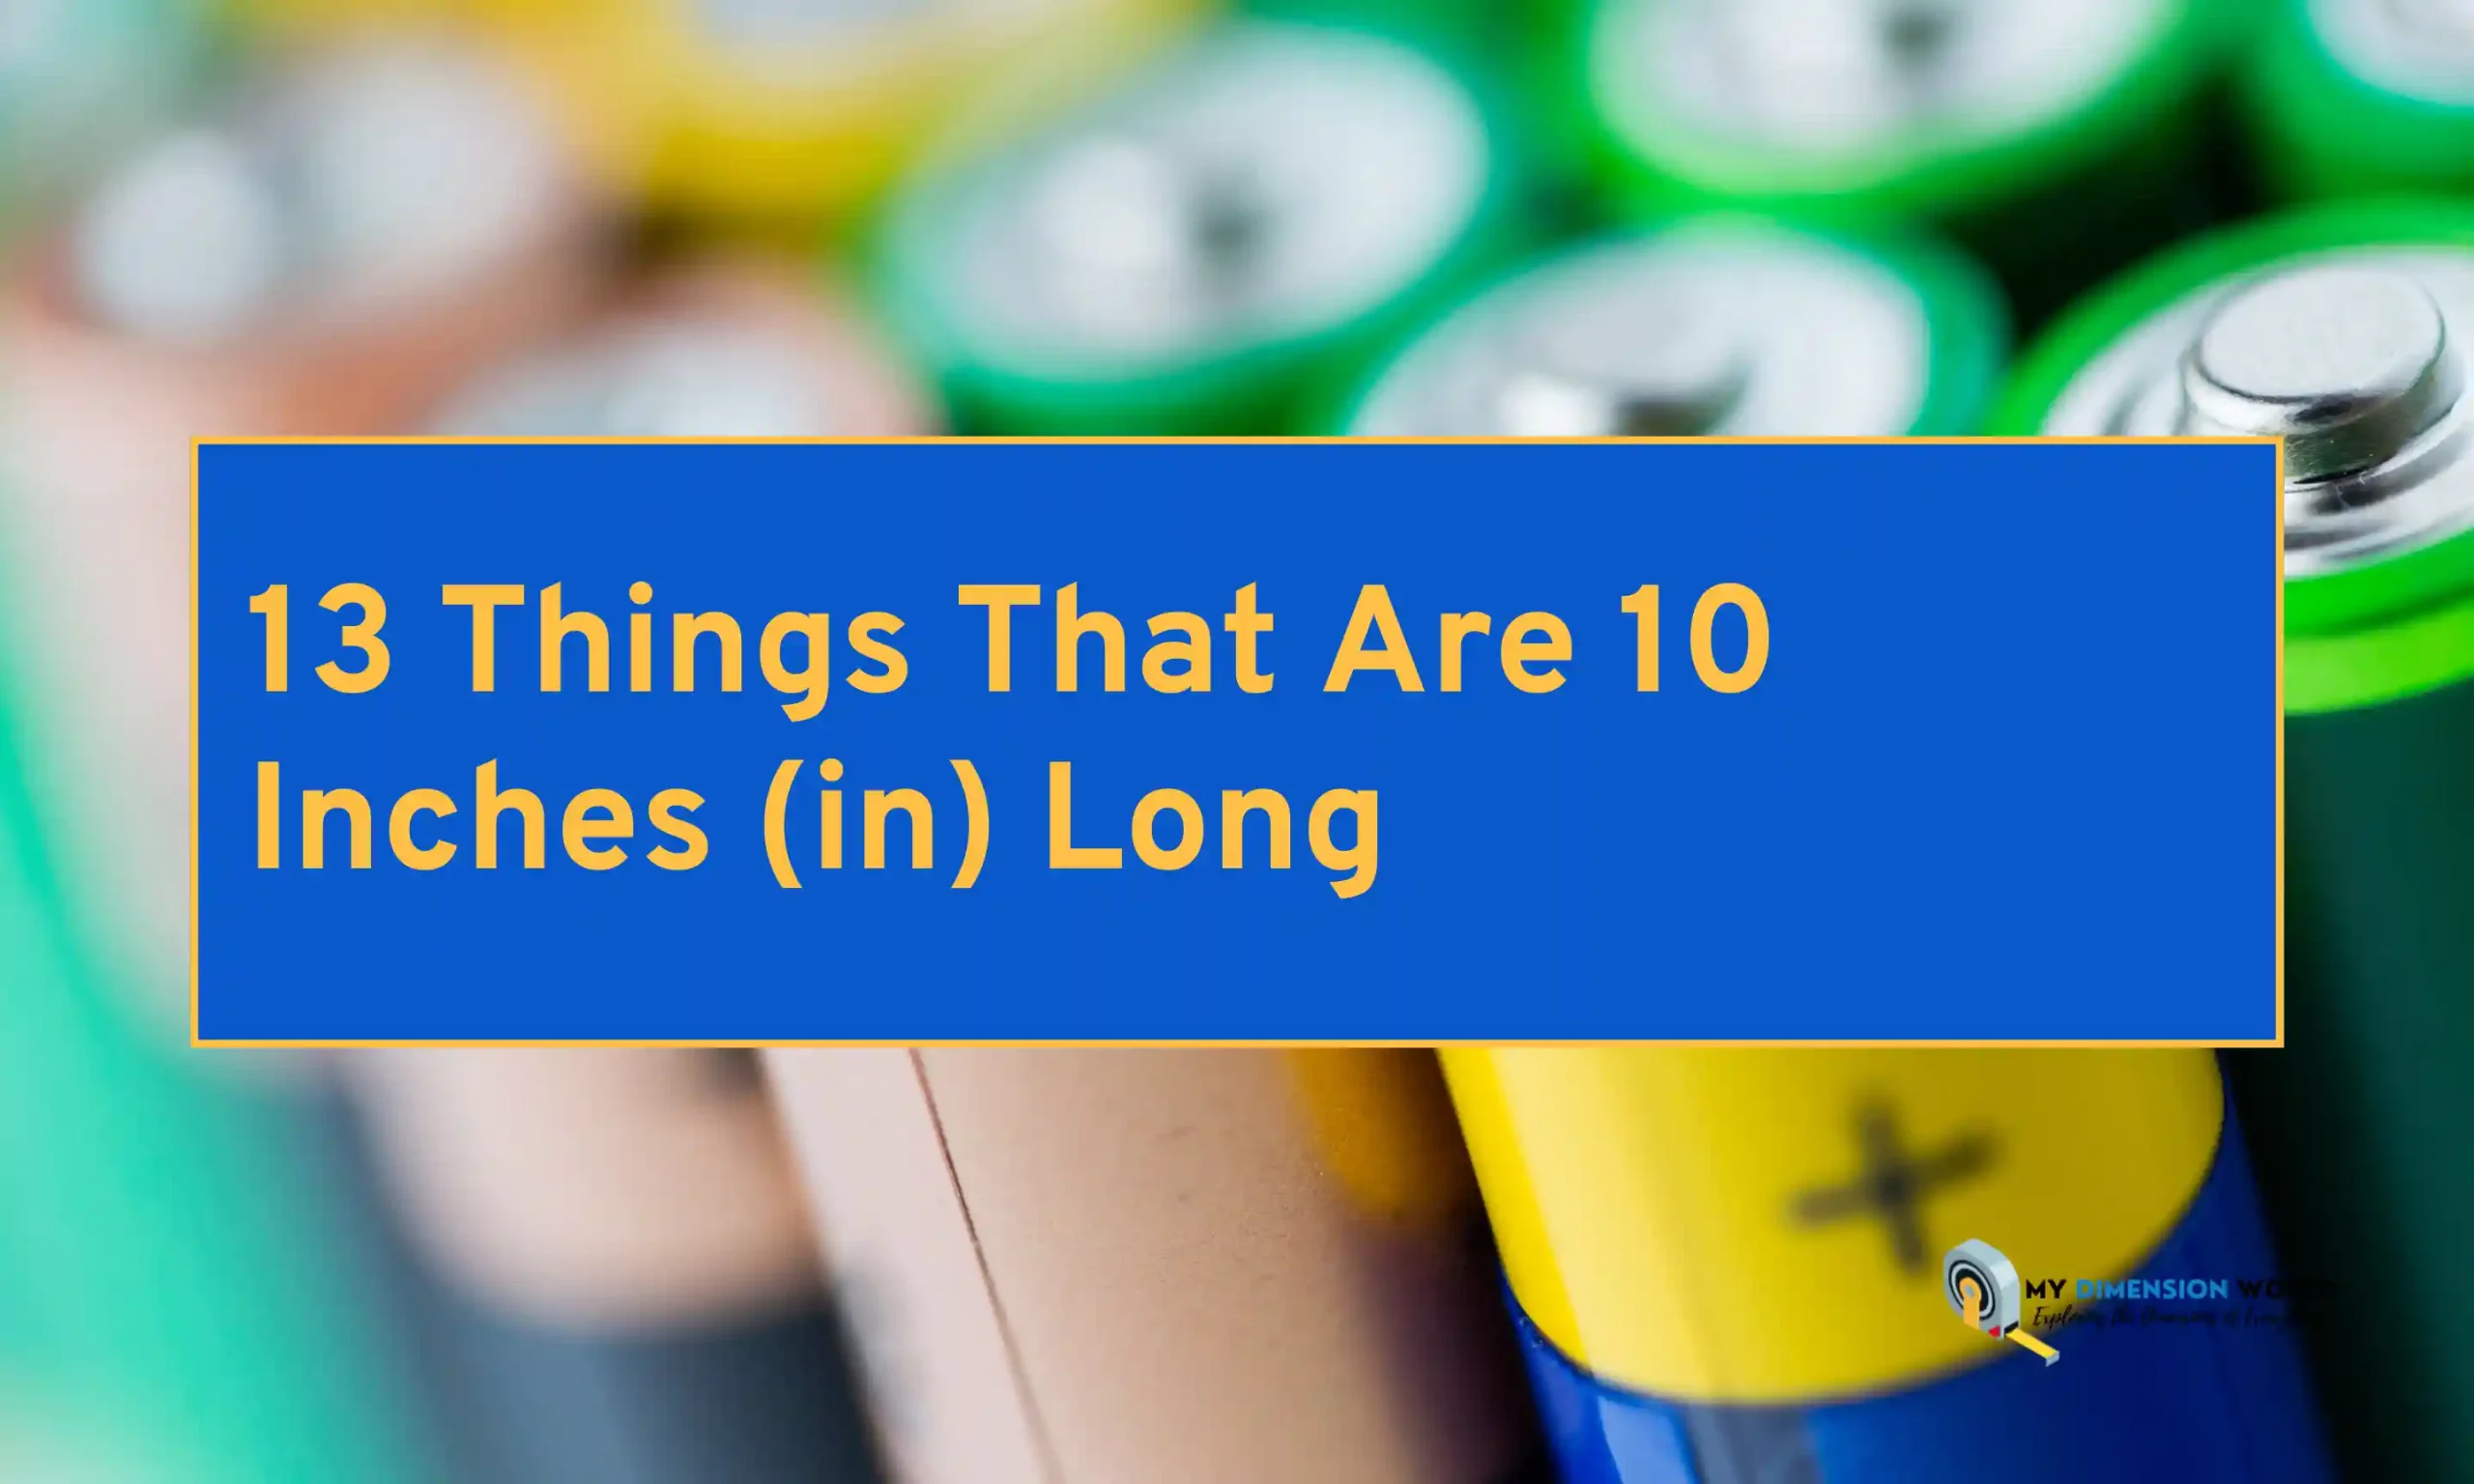 13 Things That Are 10 Inches (in) Long